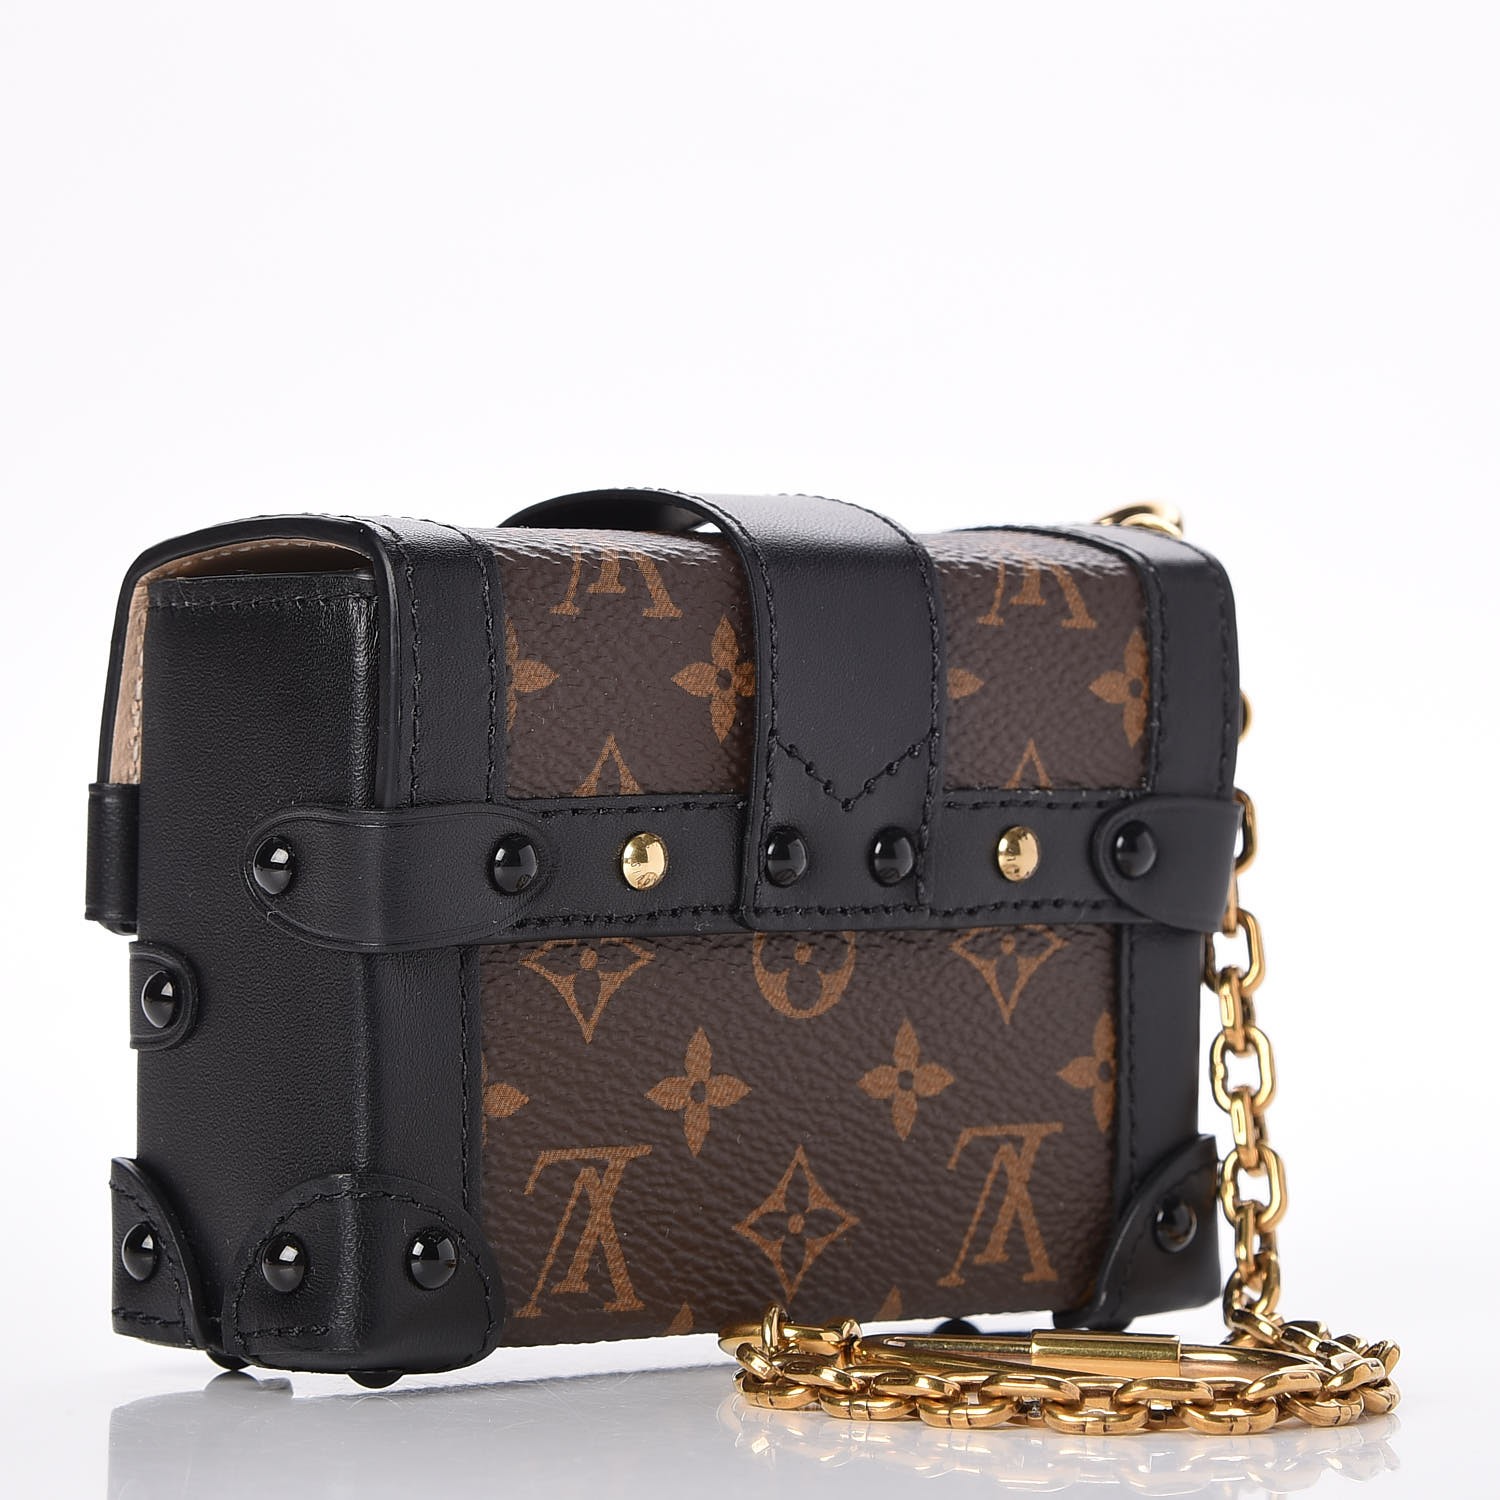 Watch this: It's The Louis Vuitton Essential Trunk 